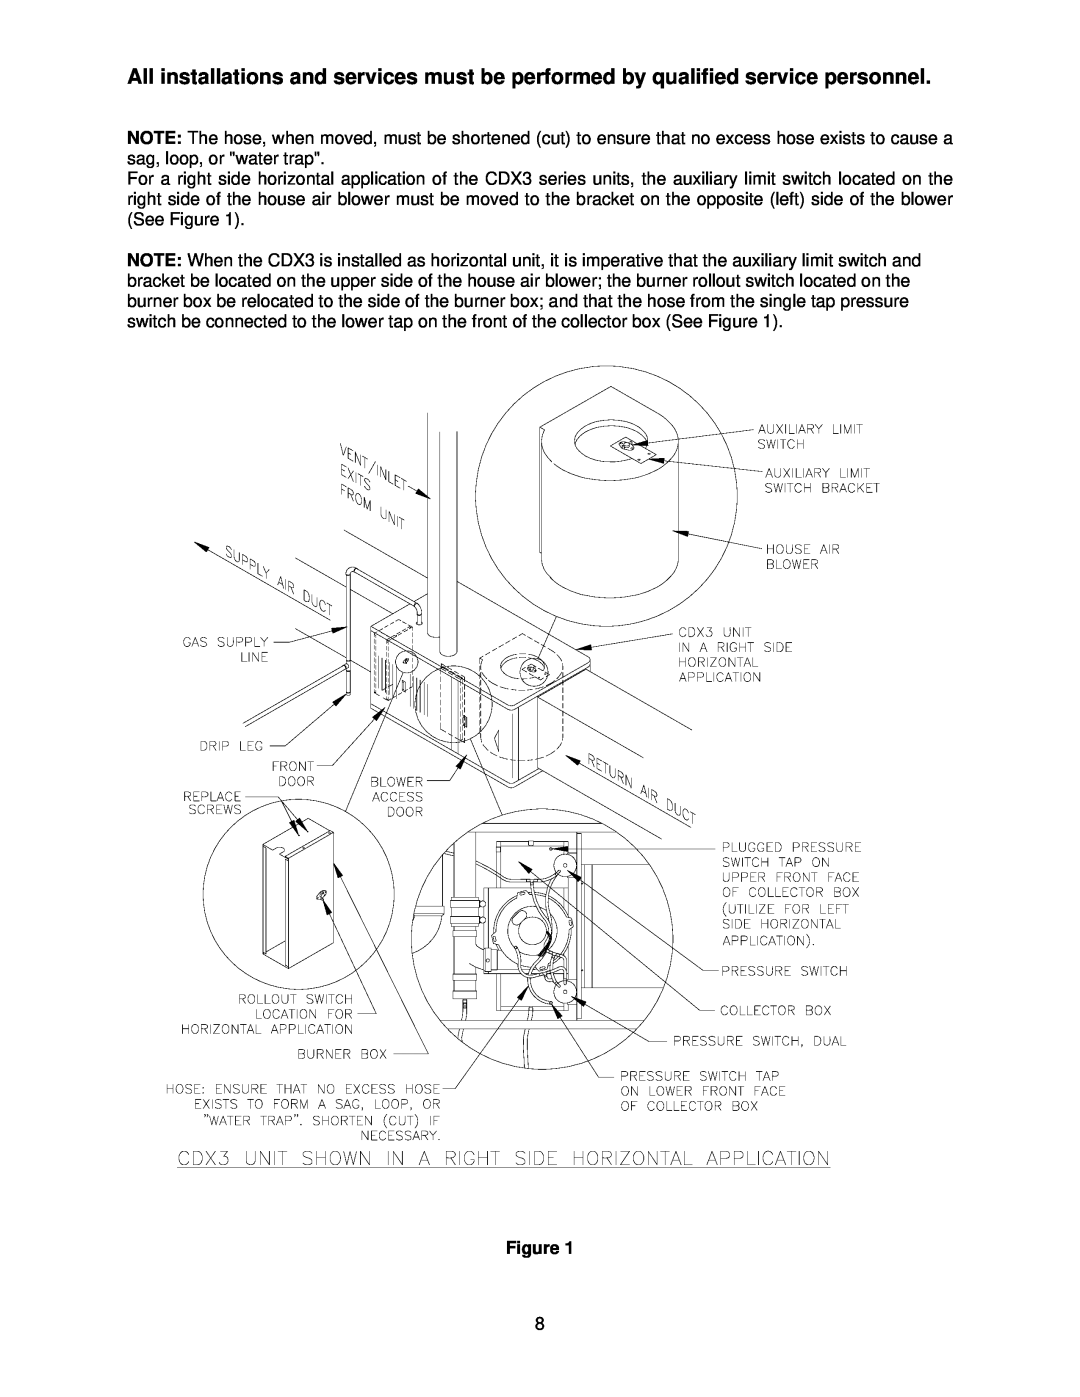 Thermo Products 125n, chx-3 75n, 100n operation manual Figure 